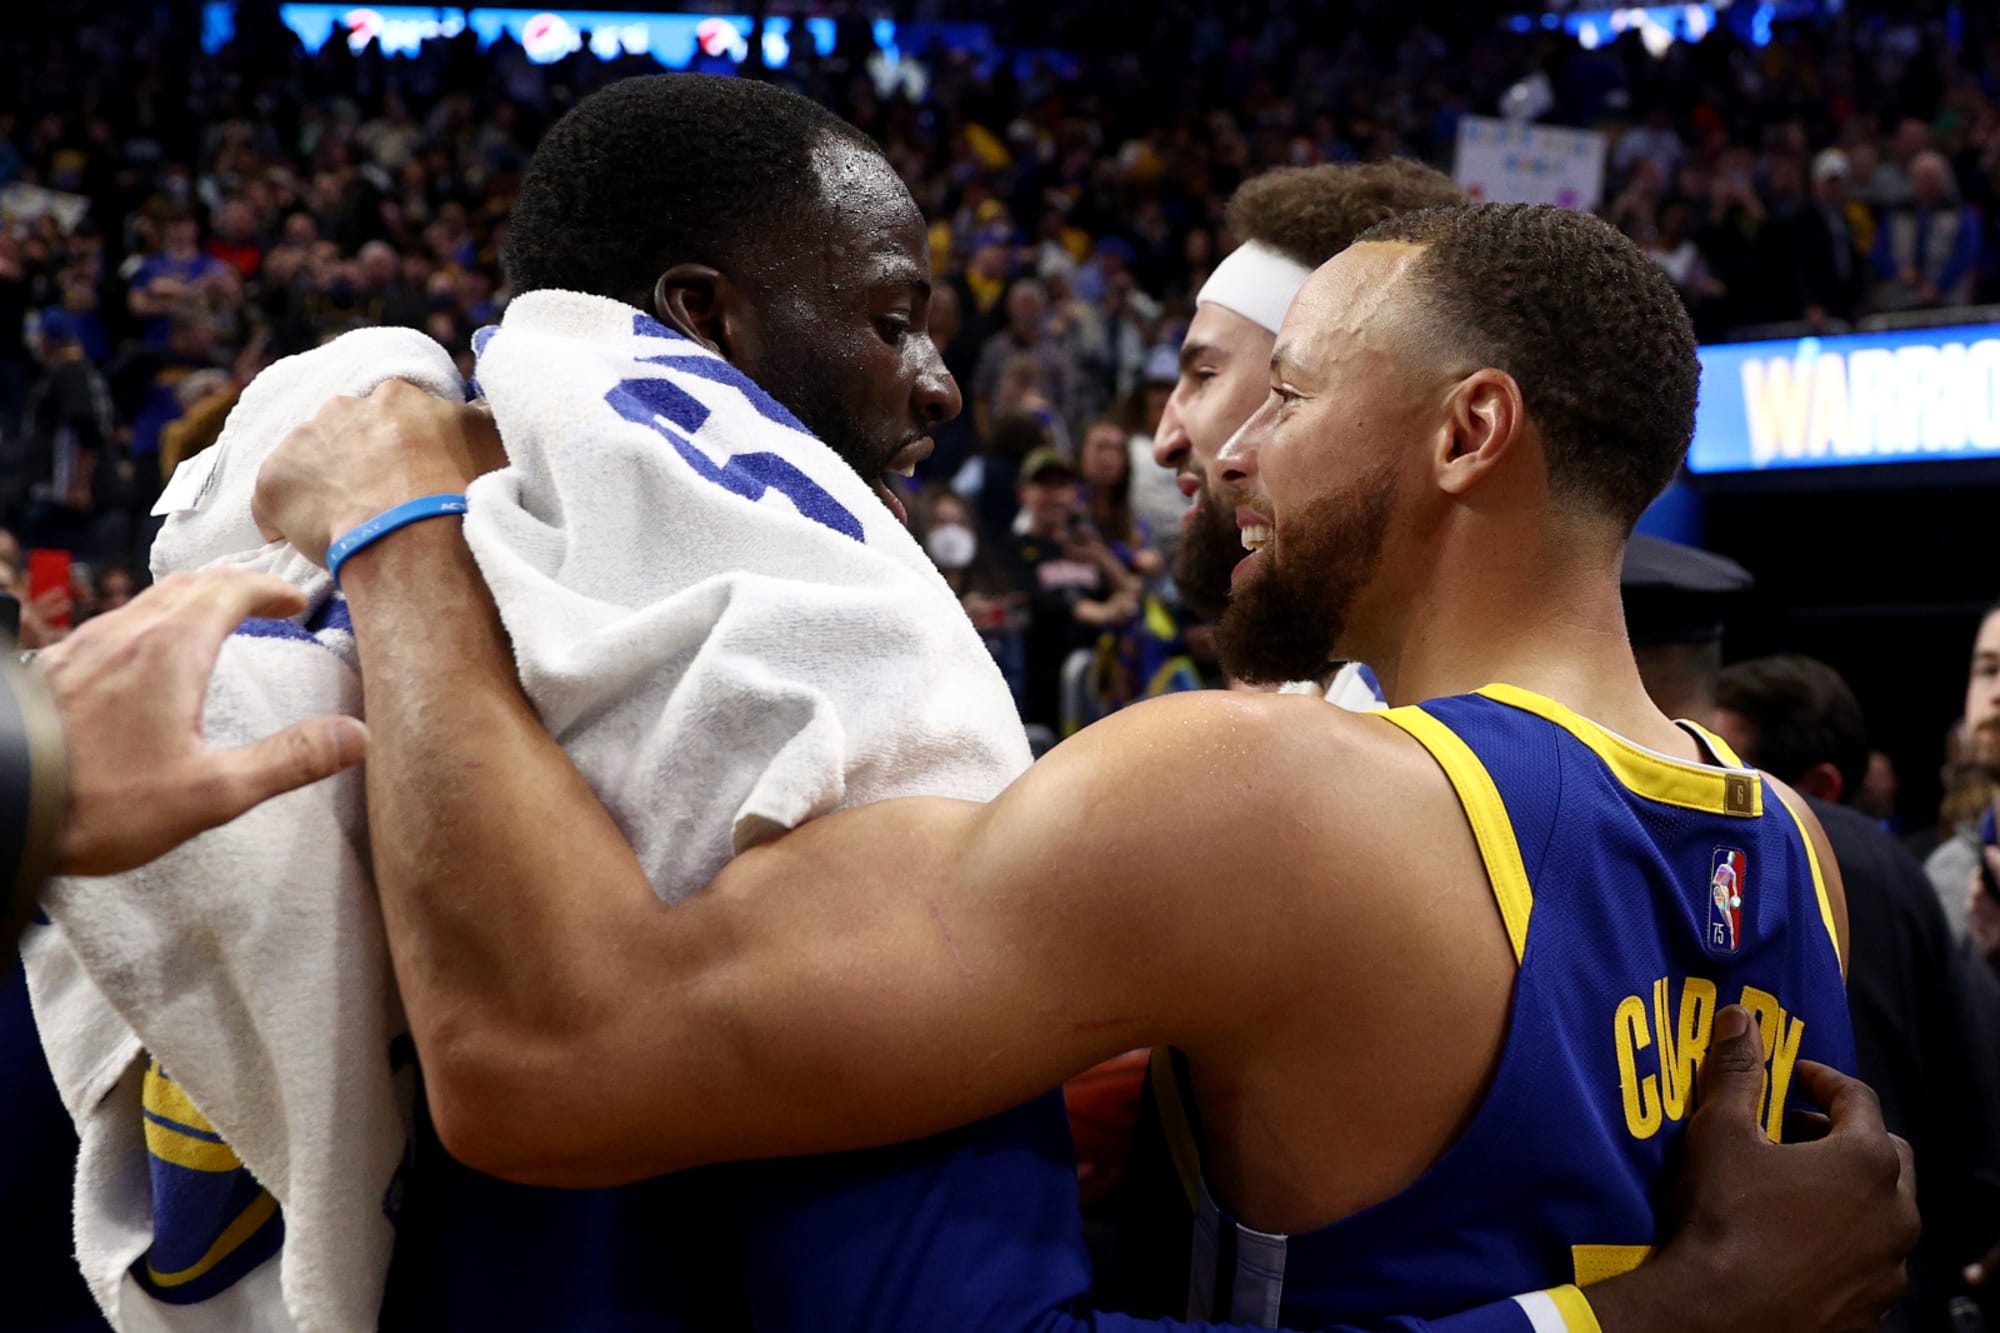 Draymond, Klay and Steph celebrate being on the court together again